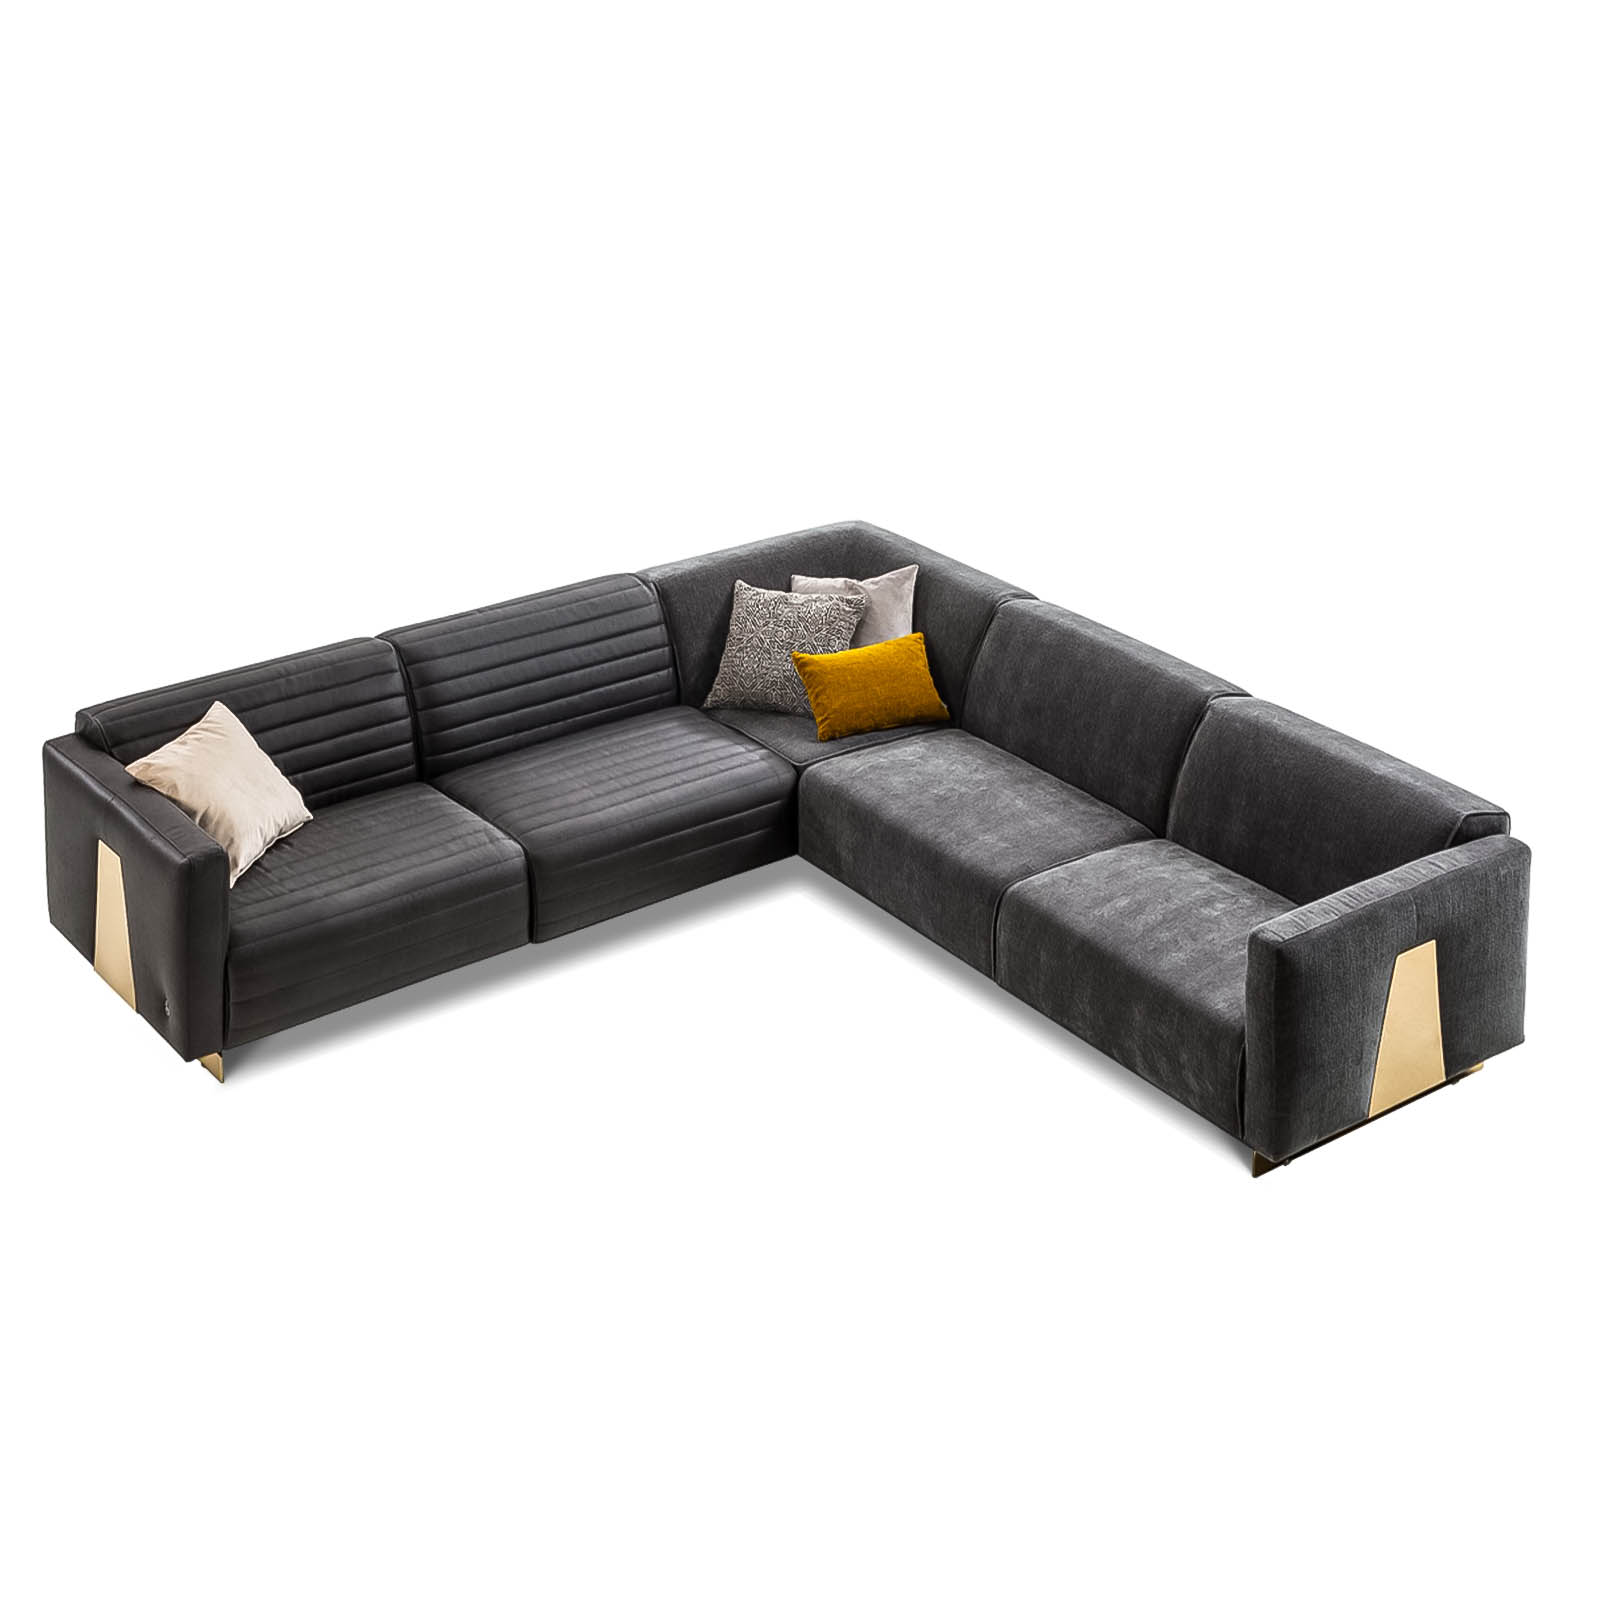 heritage modular sofa customizable quilted upholstery